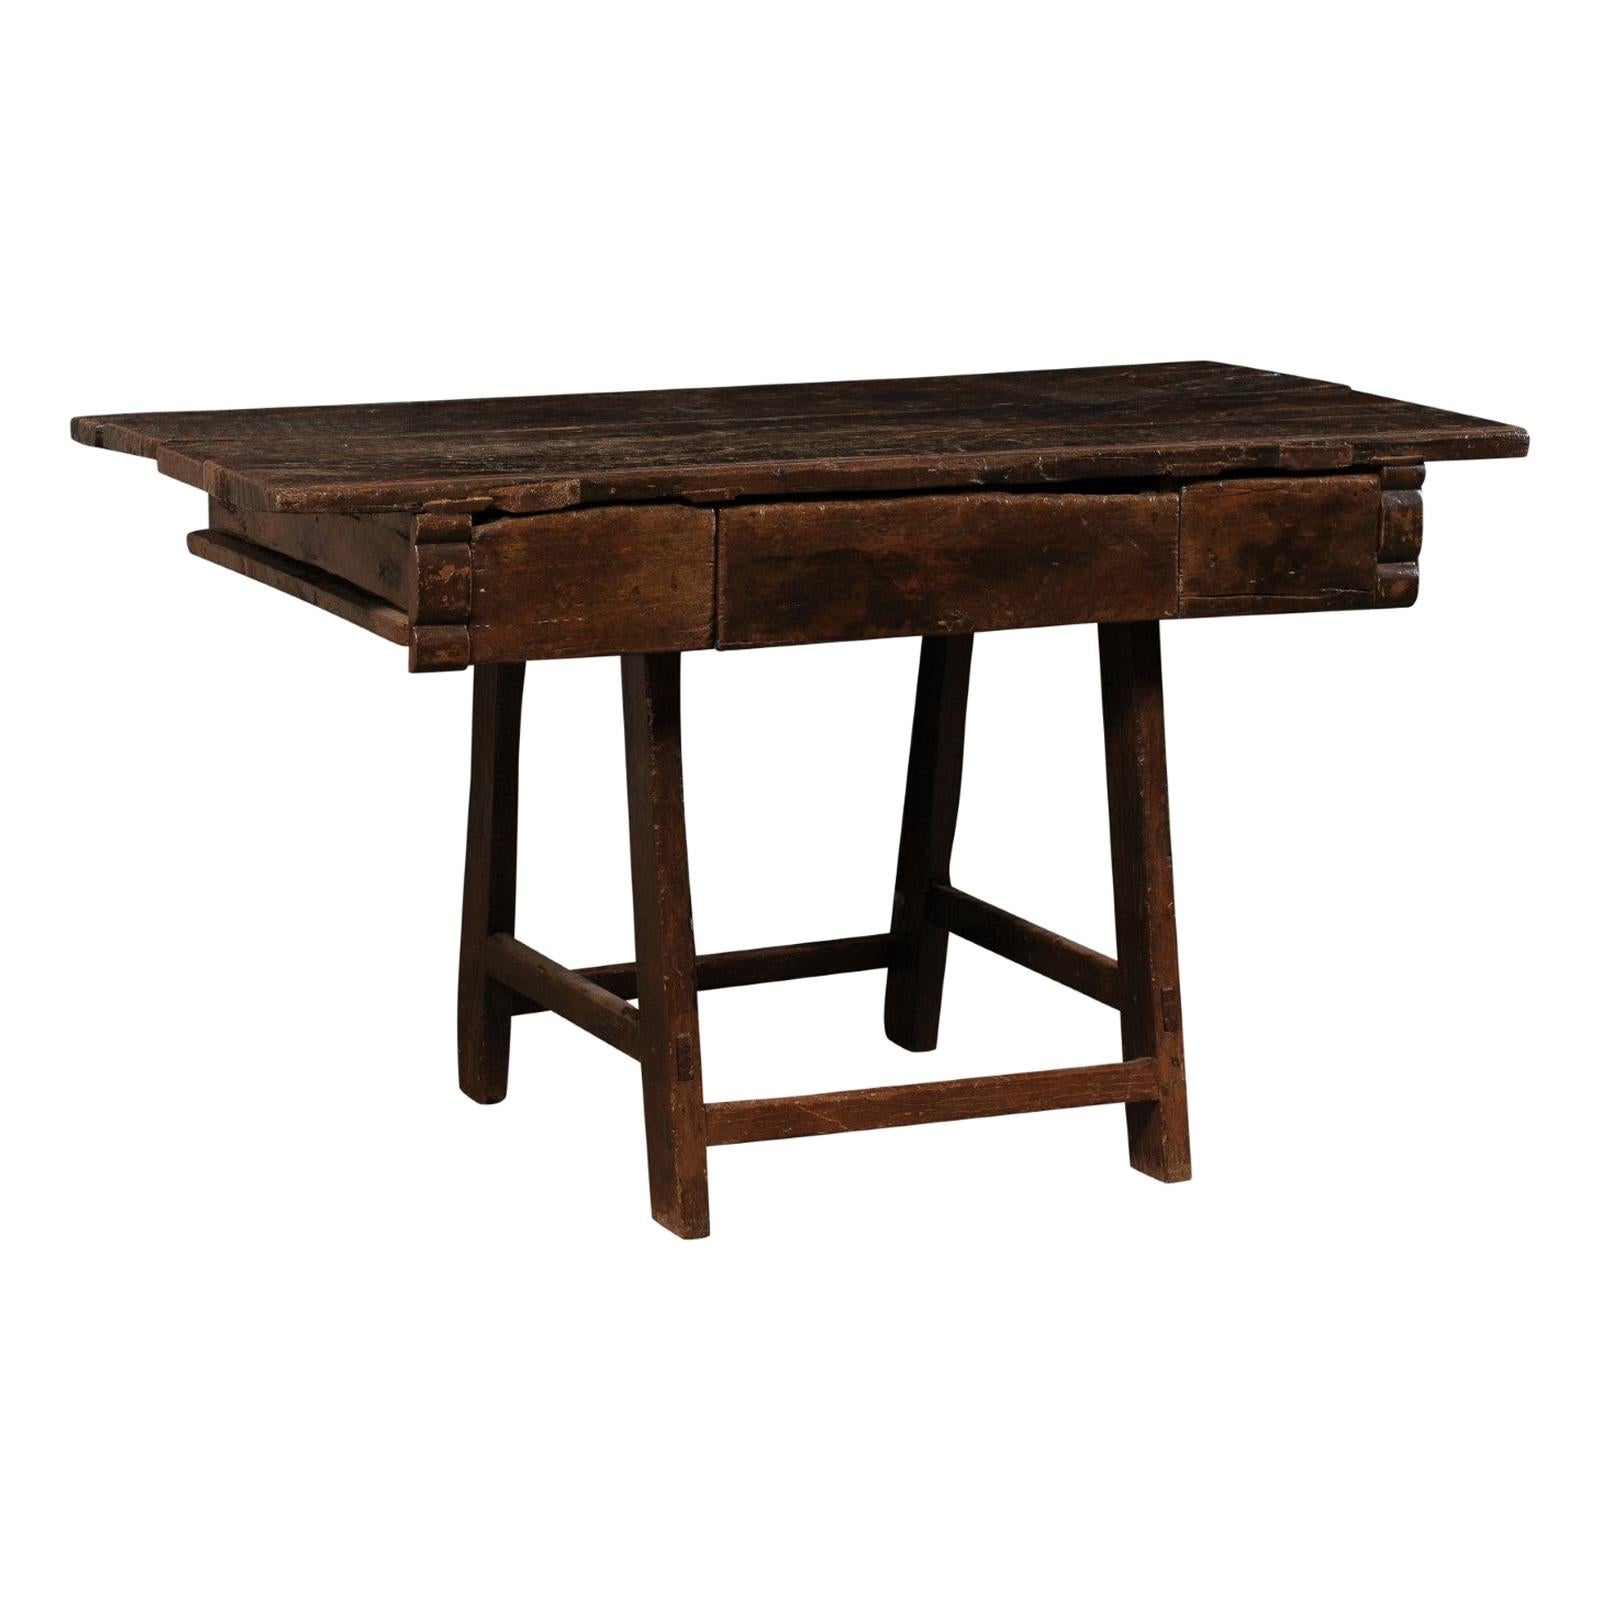 18th C. Brazilian Peroba Wood Table with Drawers, Exquisitely Rustic For Sale